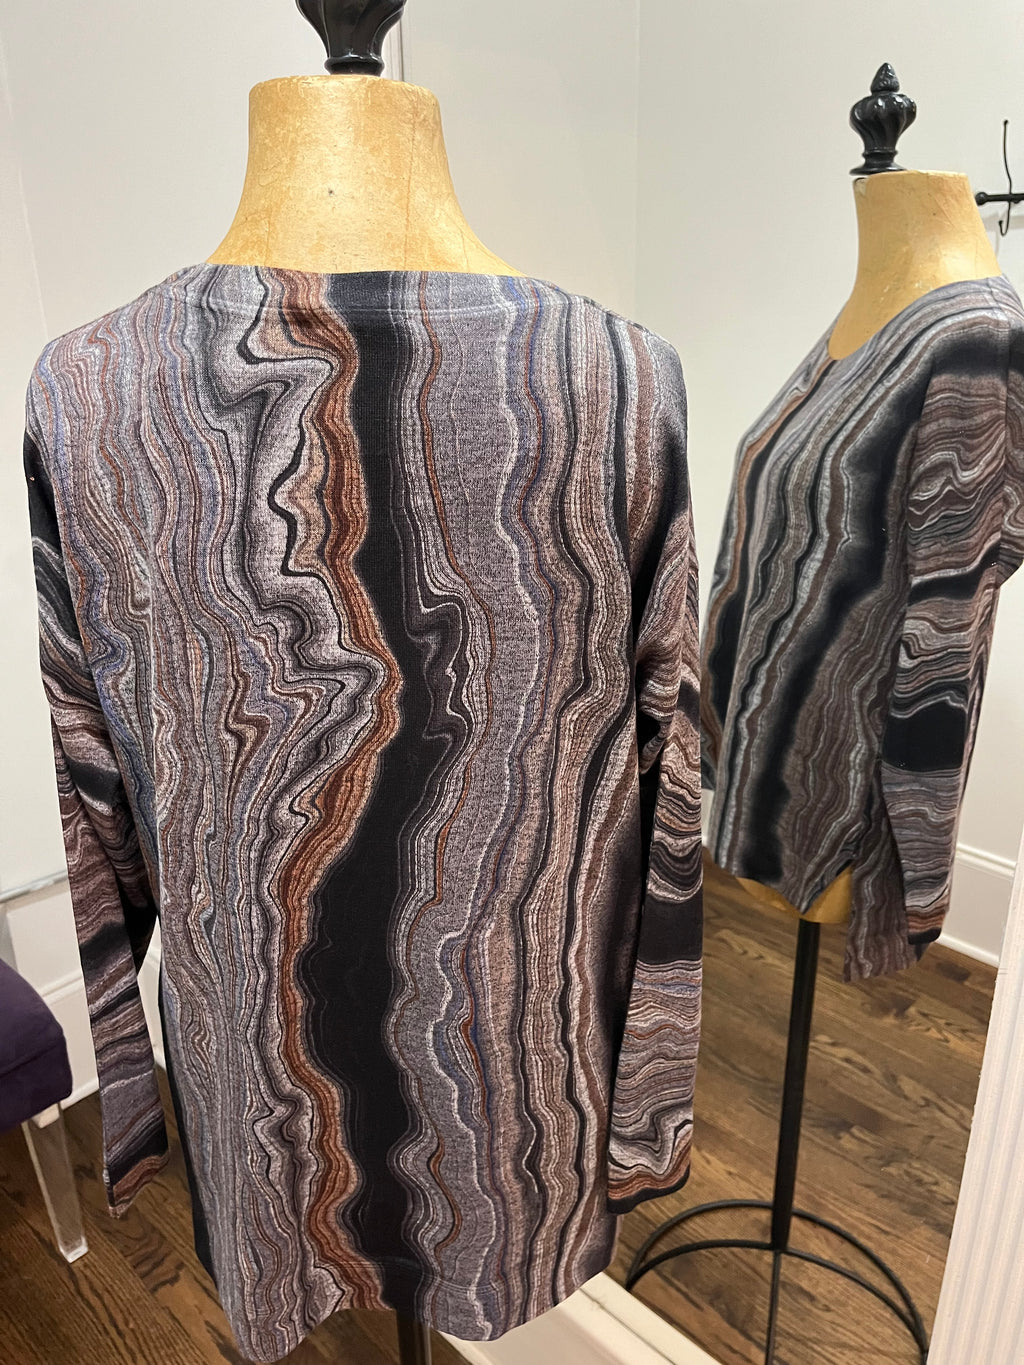 Multi Print Sweater by Nally and Millie